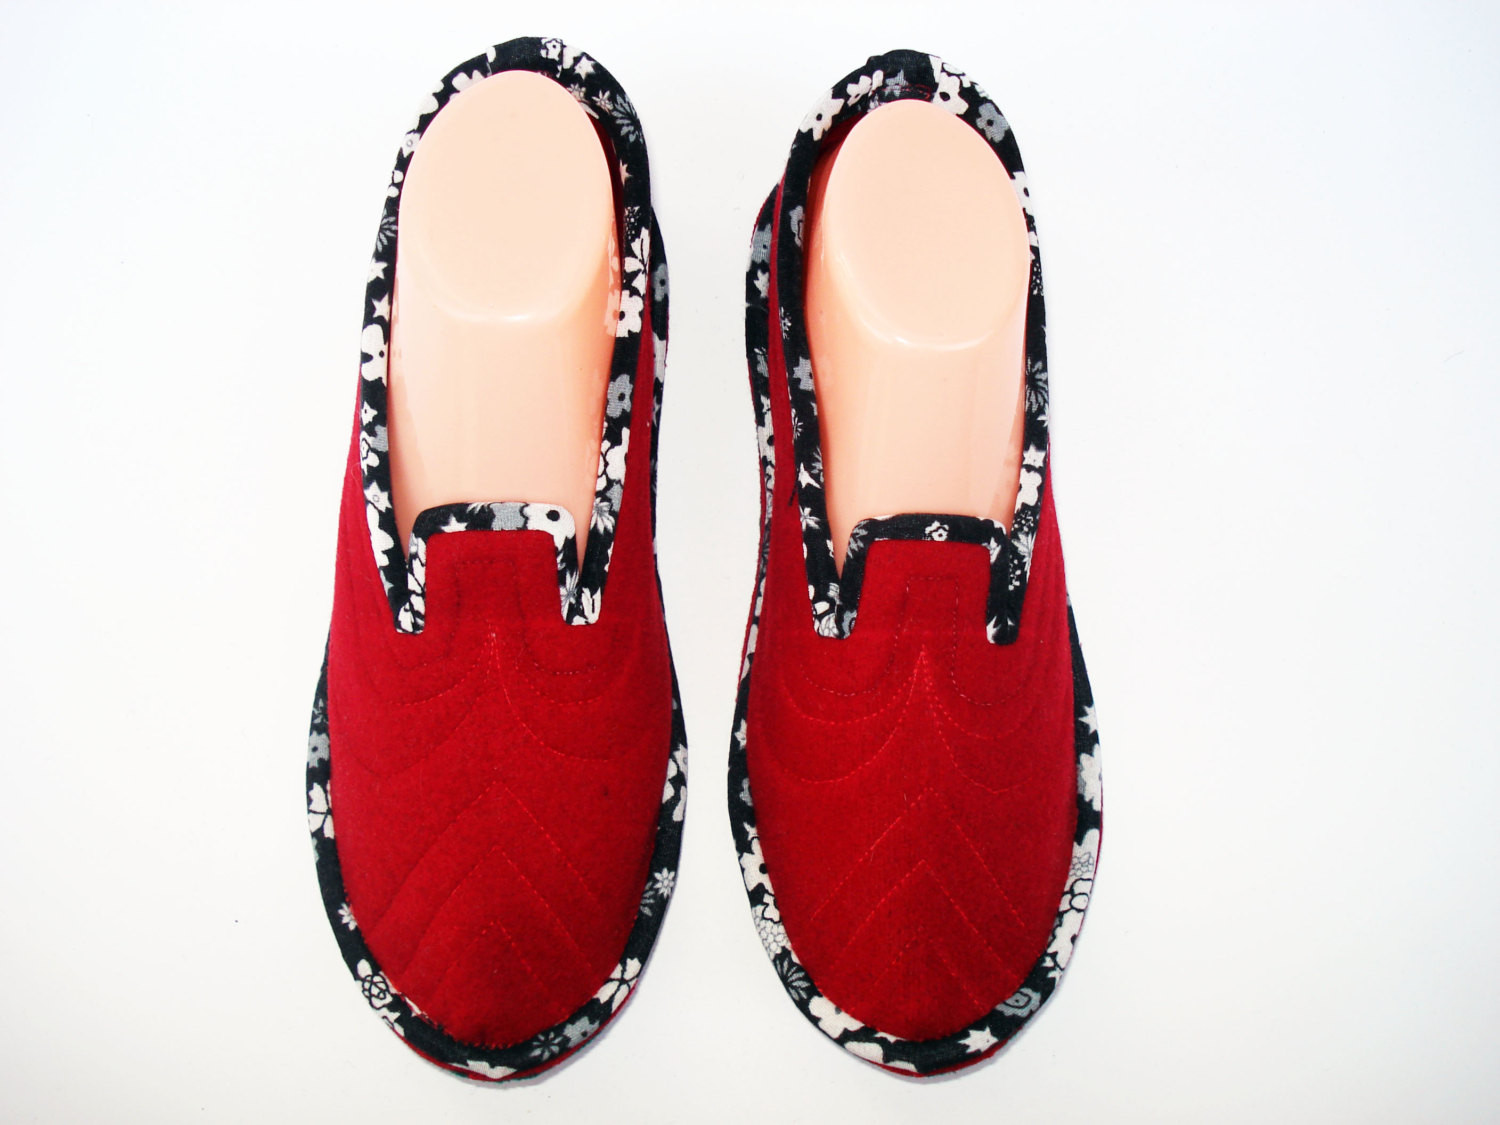 Bedroom Slippers Womens
 Red Womens Slippers Home Slippers House Slippers Bedroom